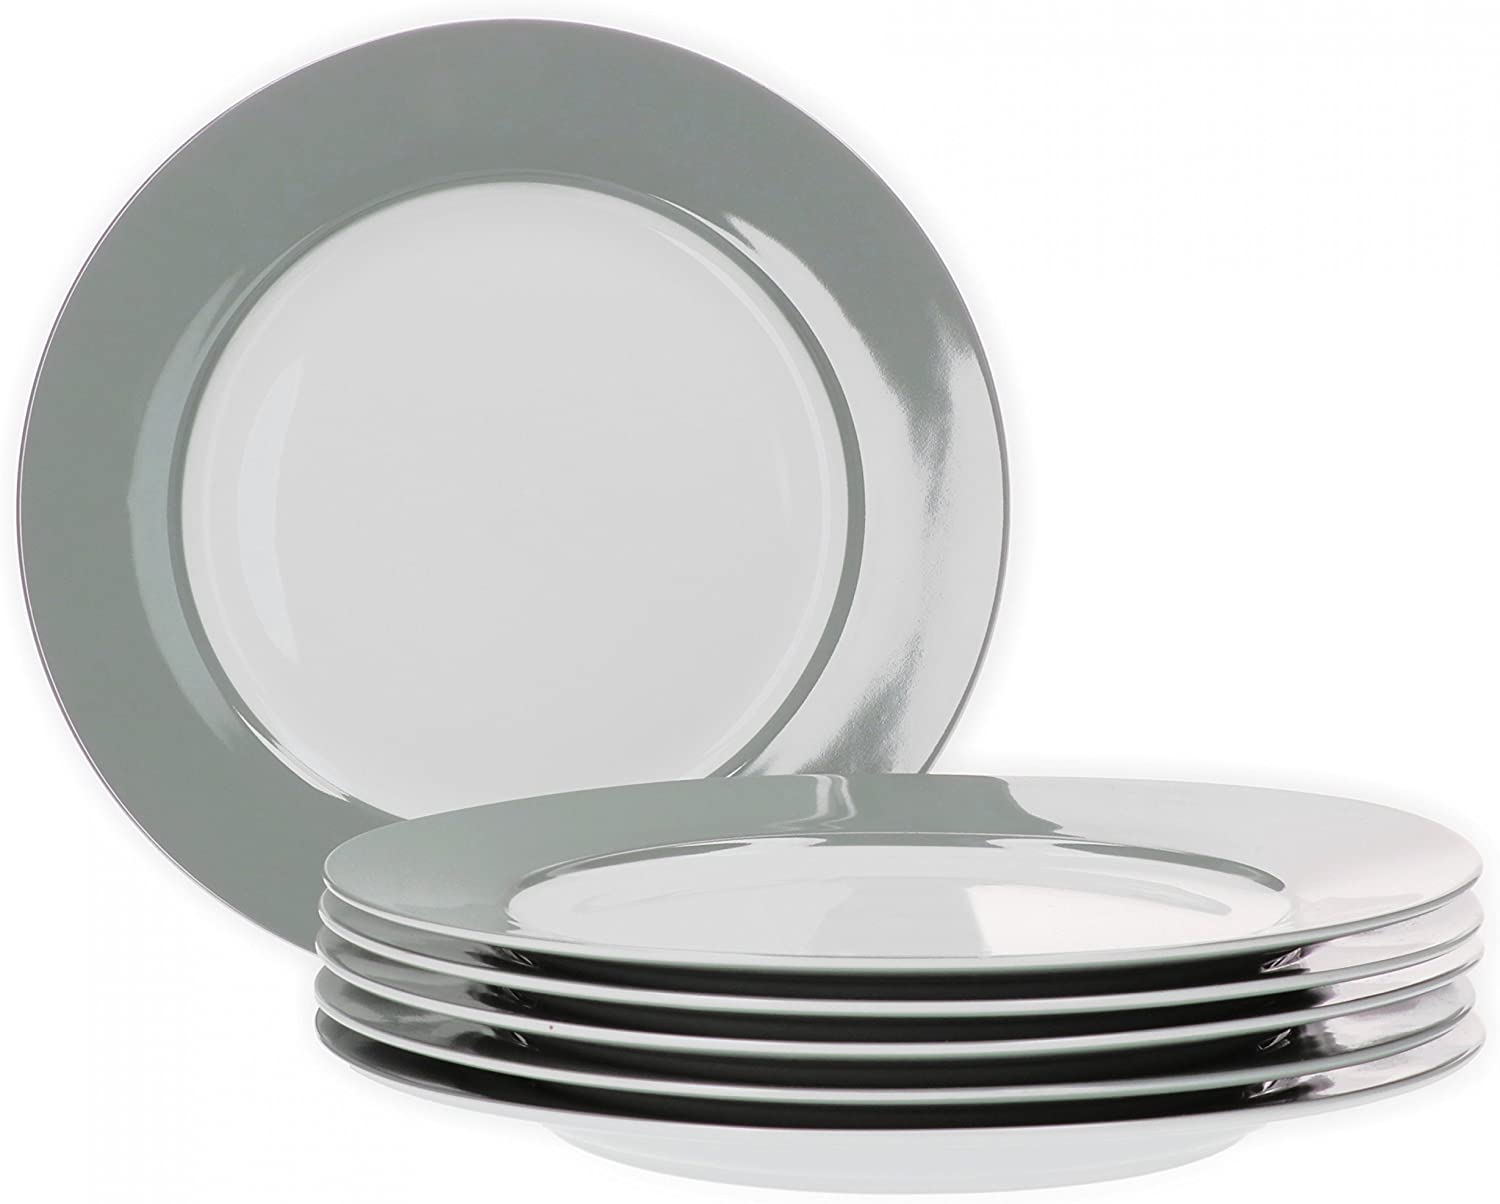 Van Well Vario Dinner Plate Set 6 Pieces I Dinner Service for 6 People I Flat Dining Plate with Diameter 26.5 cm I Porcelain Service White with Grey Rim I Plate Set Microwave Safe